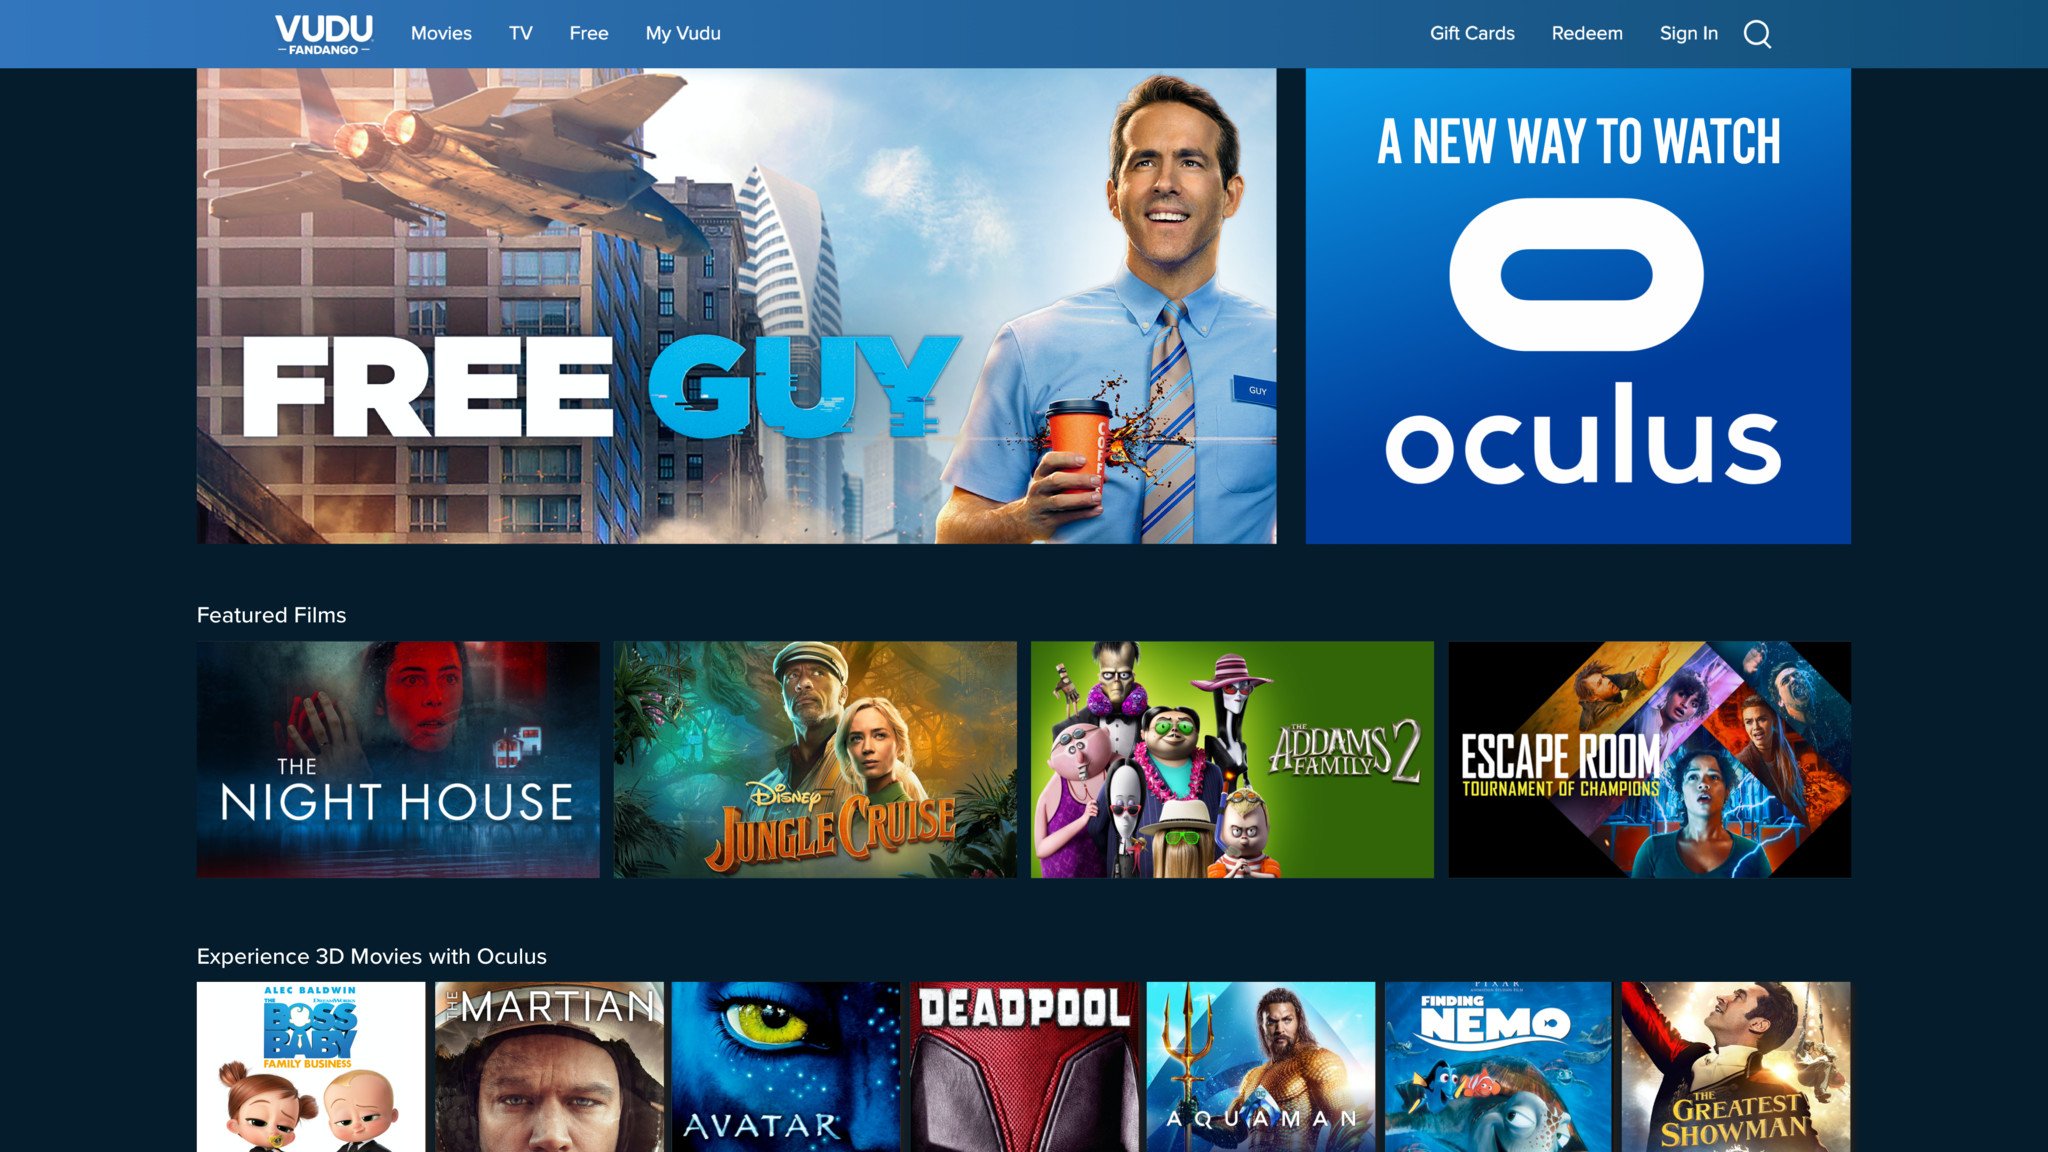 Vudu arrives on the Oculus 2 so you check out 'Free Guy | Central